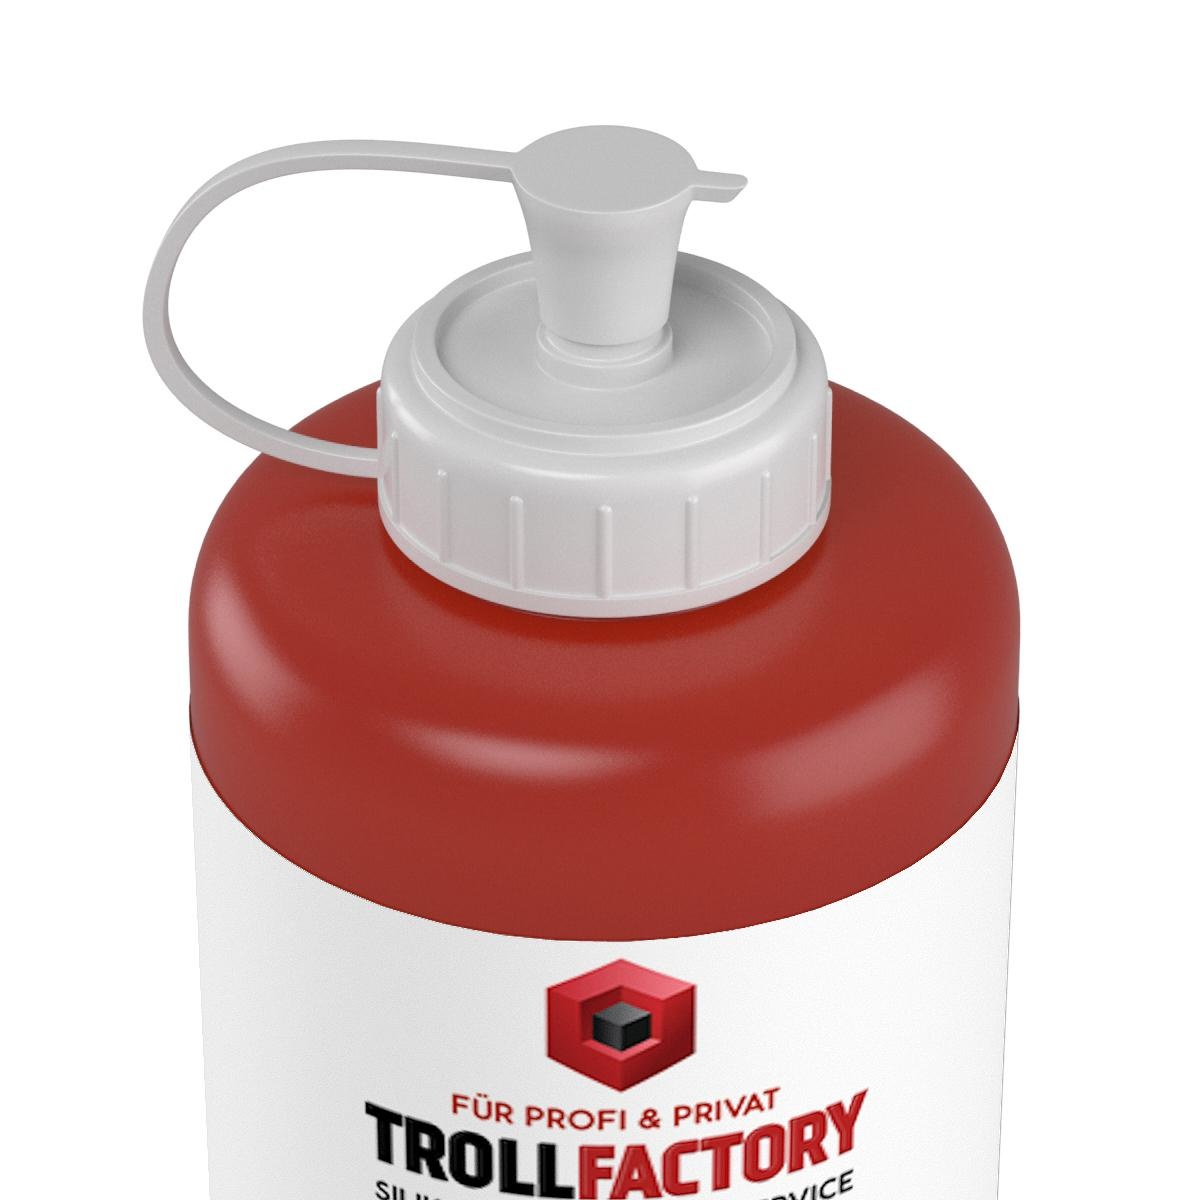 Troll Factory TFC Troll Factory Silicone Rubber Type 3 HB Tin hittebestendig 2000g